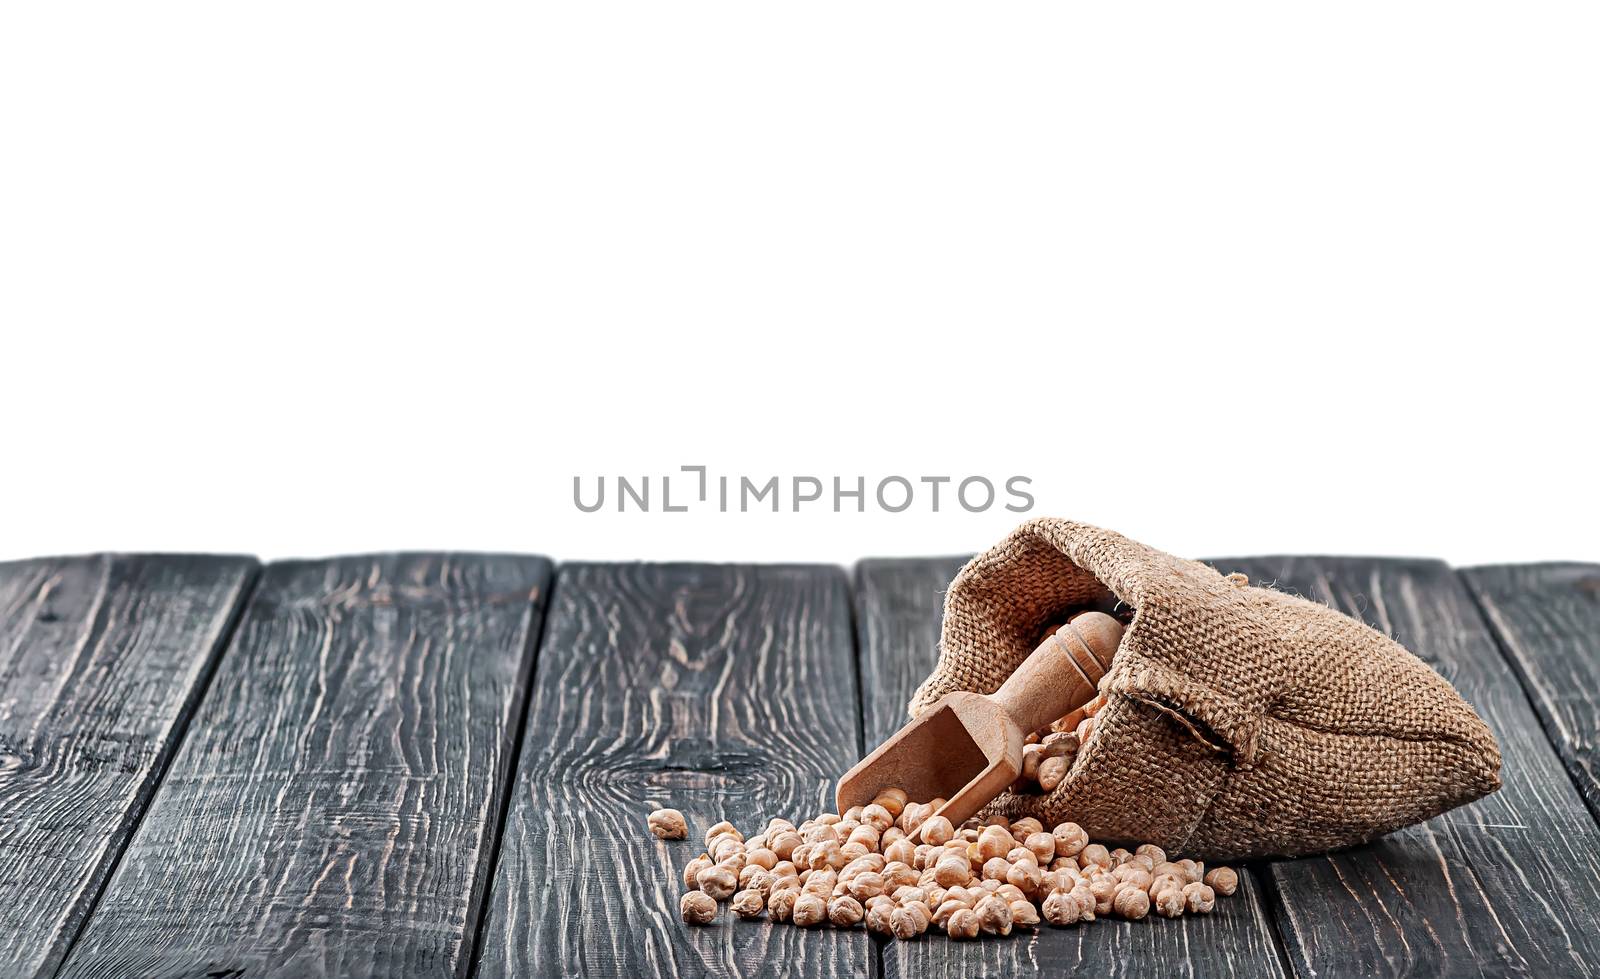 Chickpea spill out of the bag and wooden scoop on table isolated on white background